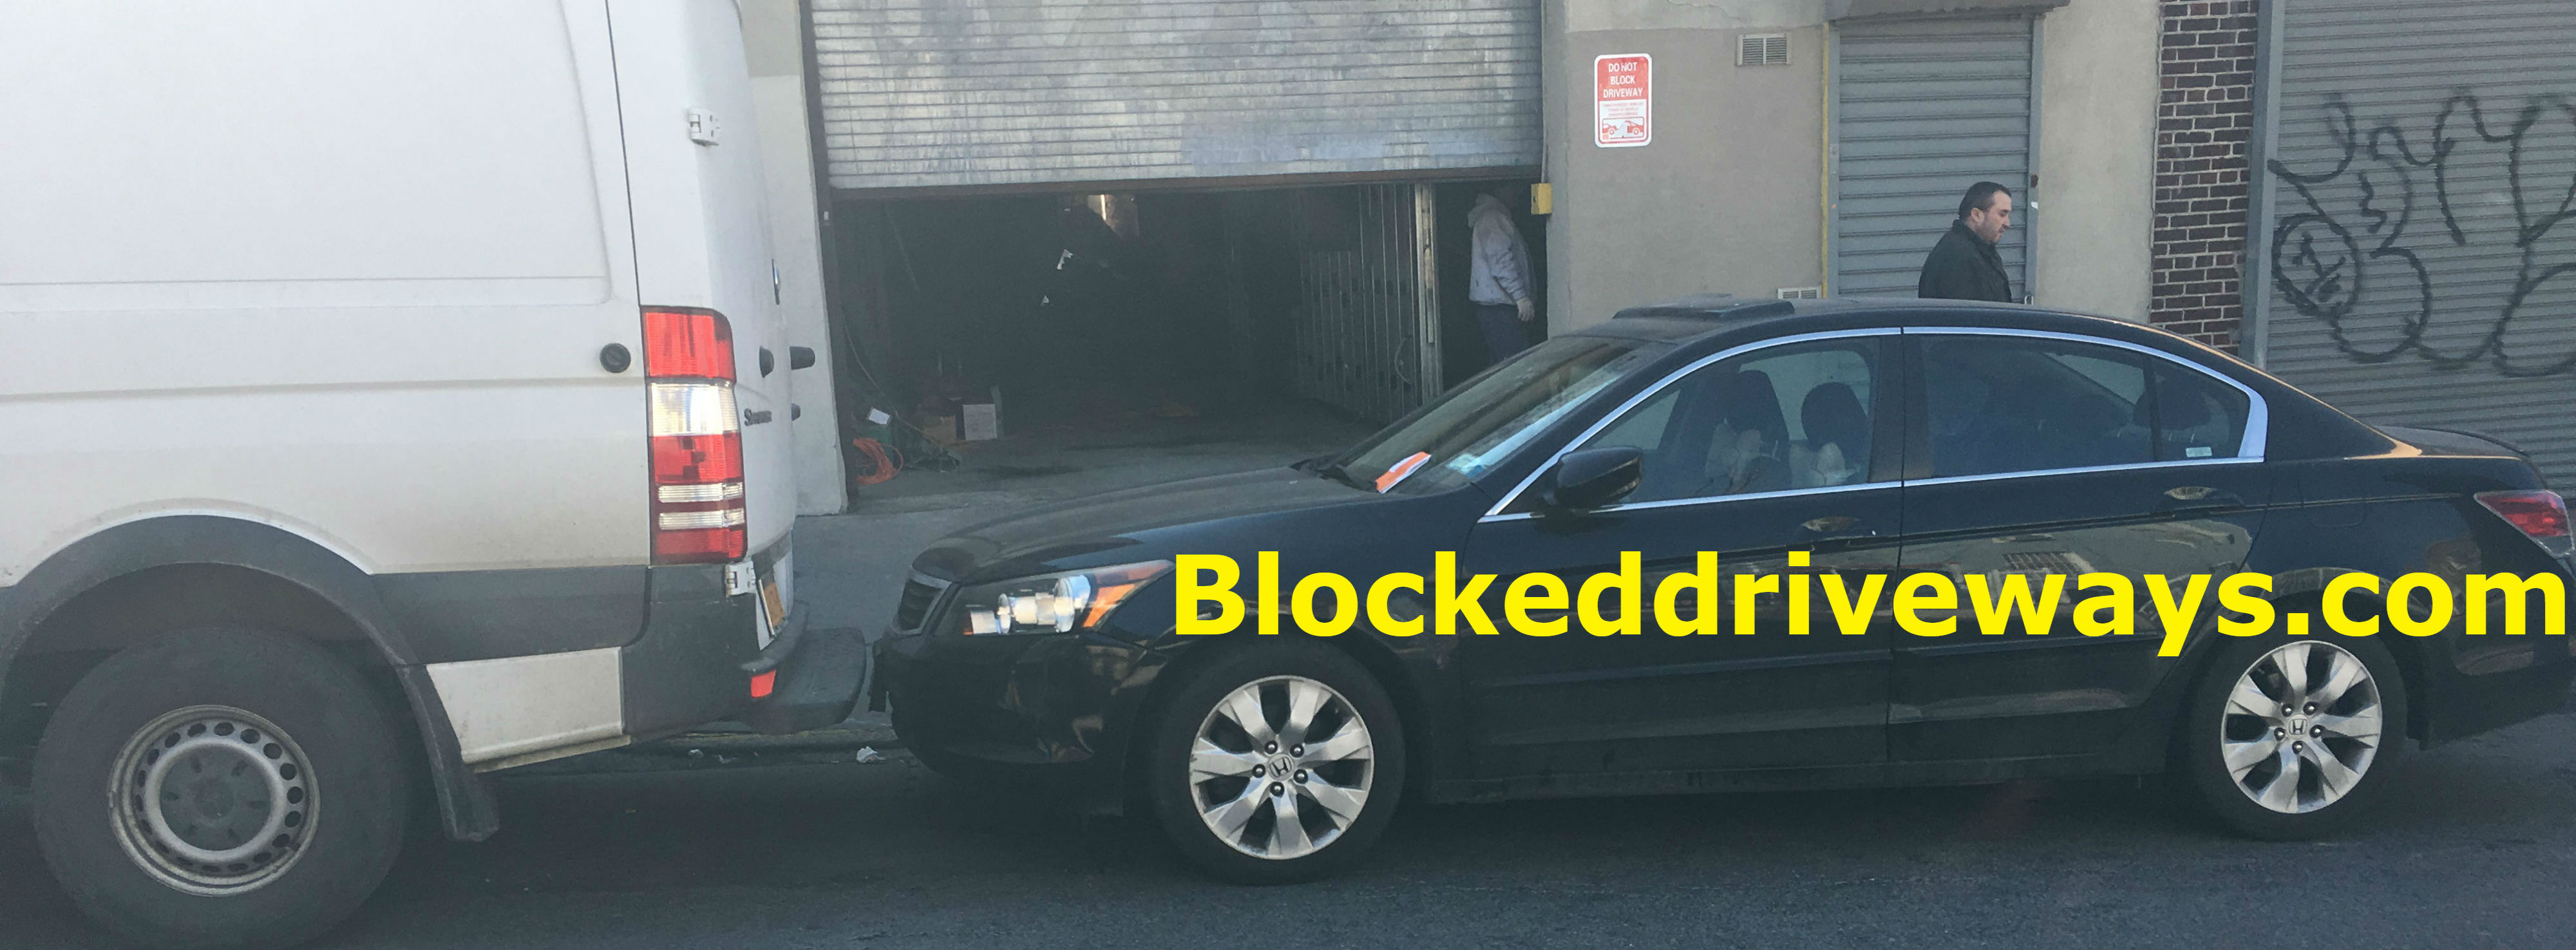 NYC Blocked Driveway Towing | 24 Hour Blocked Driveway Removal